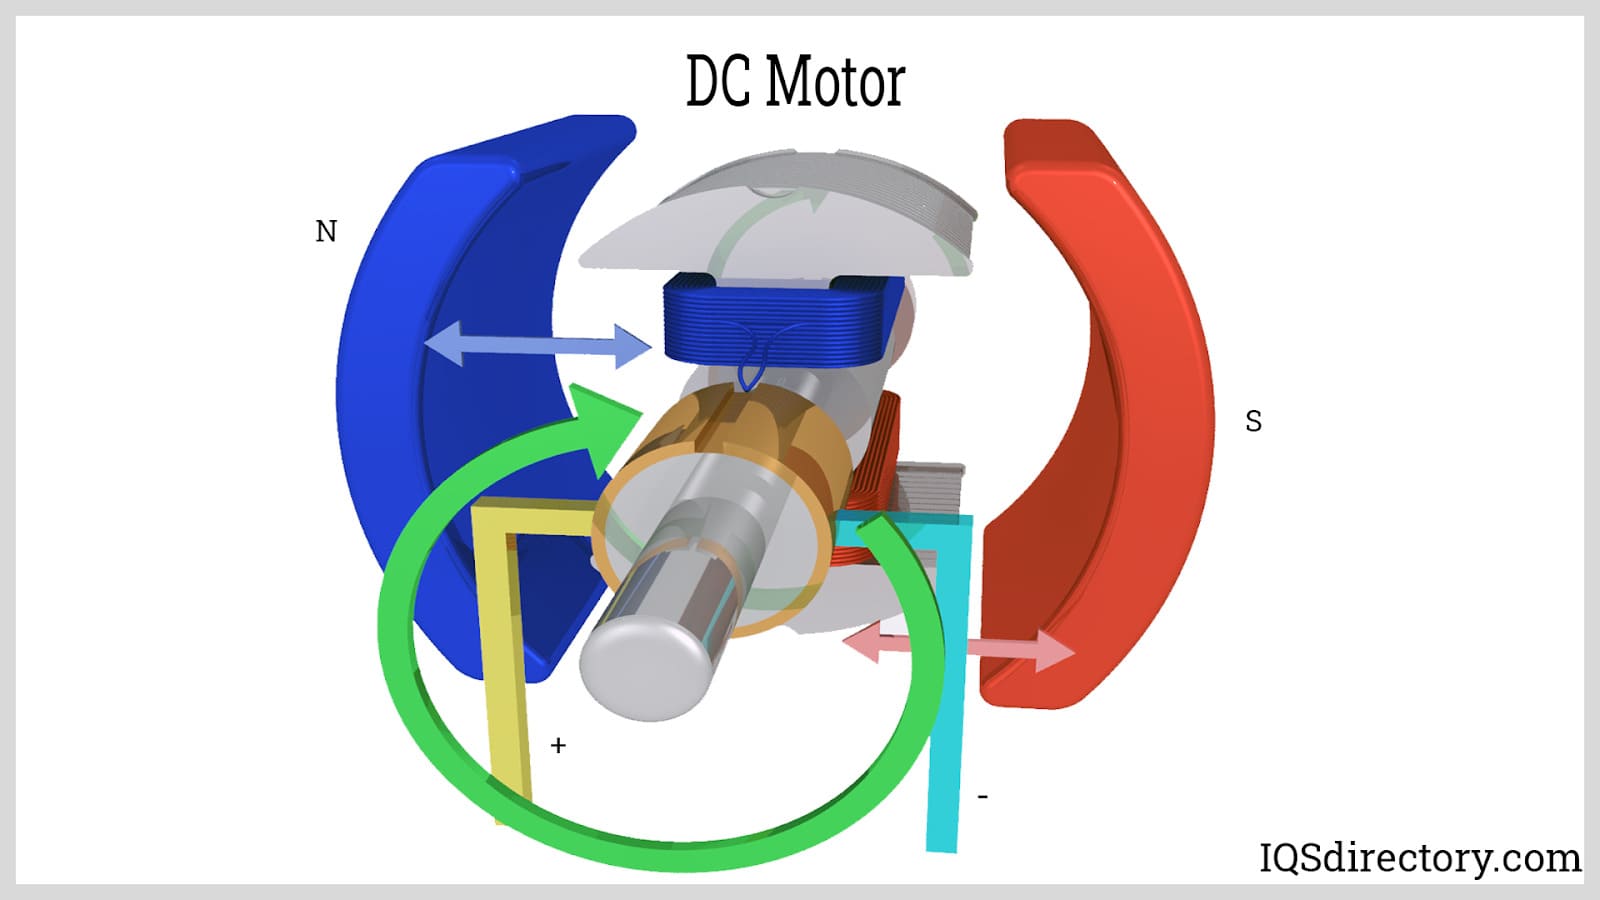 Working of an Electric Motor - Lesson for Kids